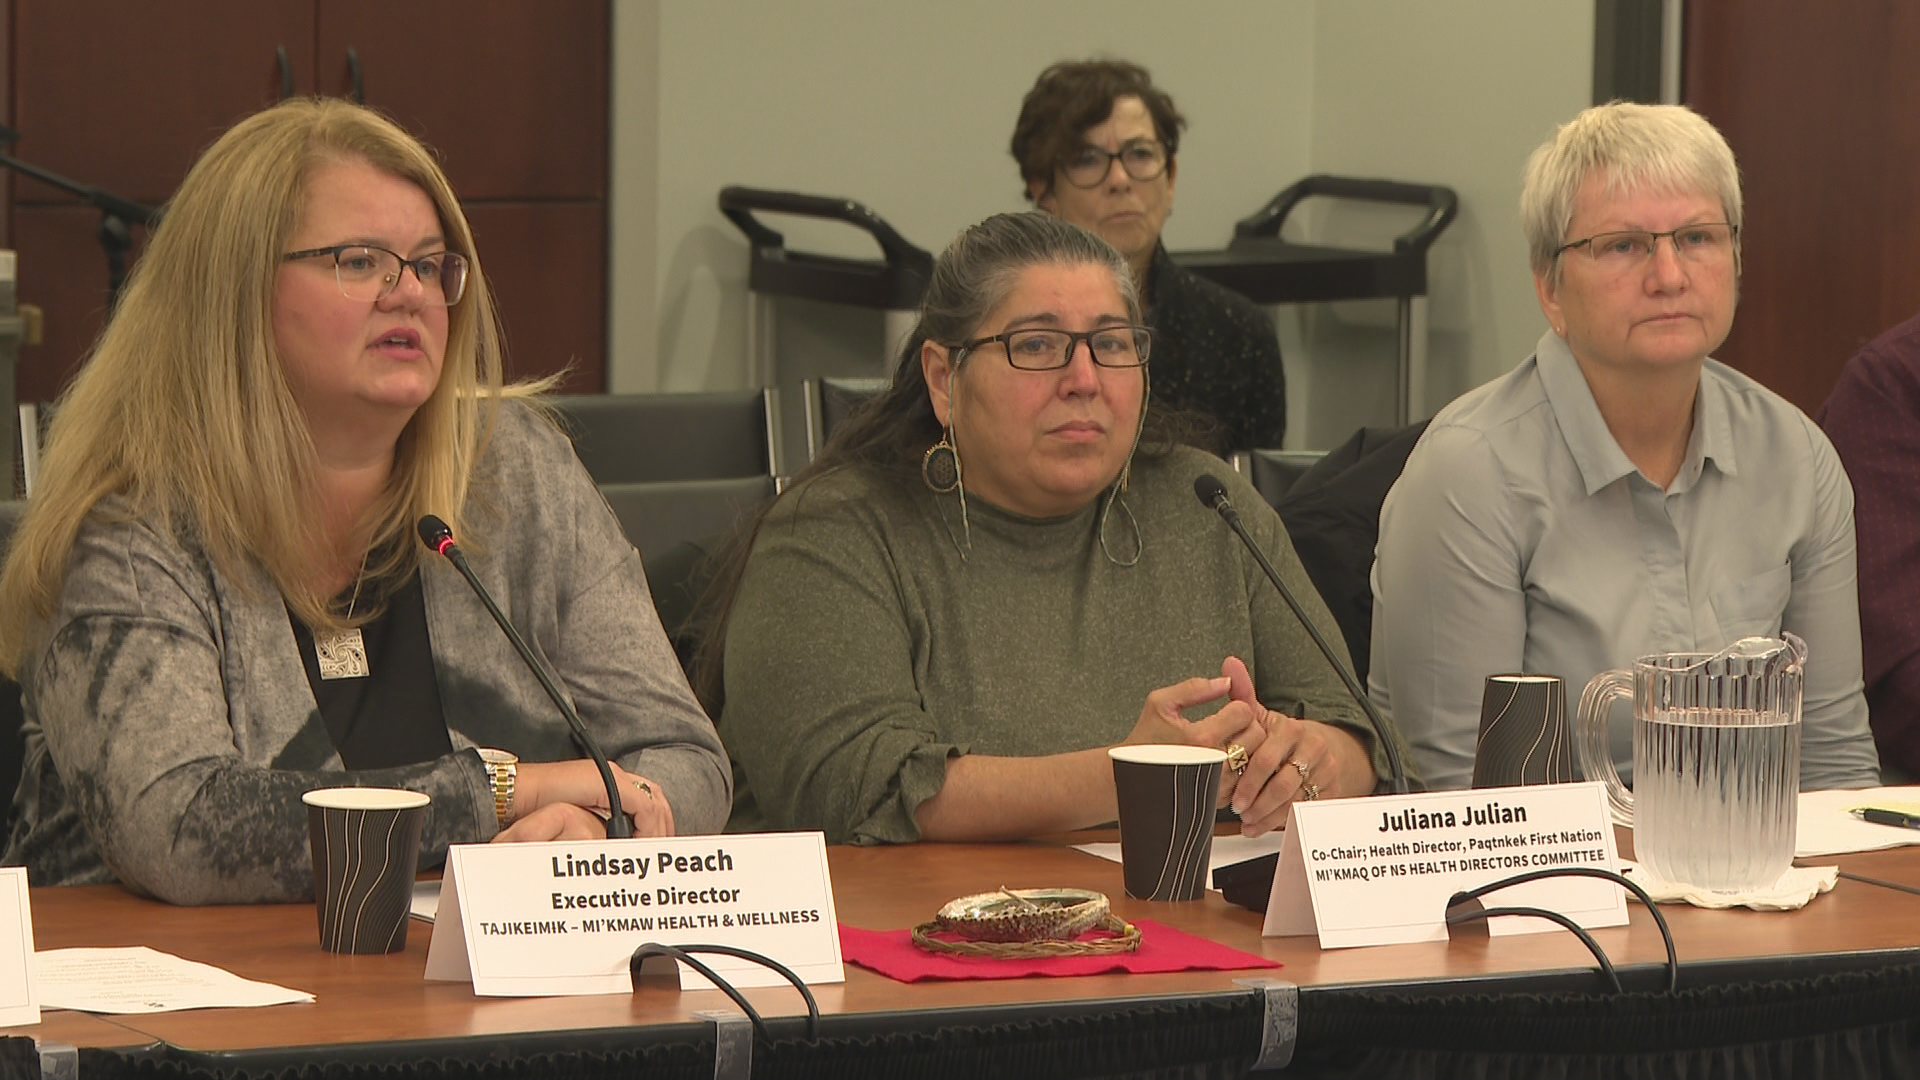 Executive Director of Tajikeimɨk, Lindsay Peach (left), and Mi’kmaq of Nova Scotia Health Directors Committee co-chair Juliana Julian (center) tell a health committee there are gaps in care for First Nations communities.